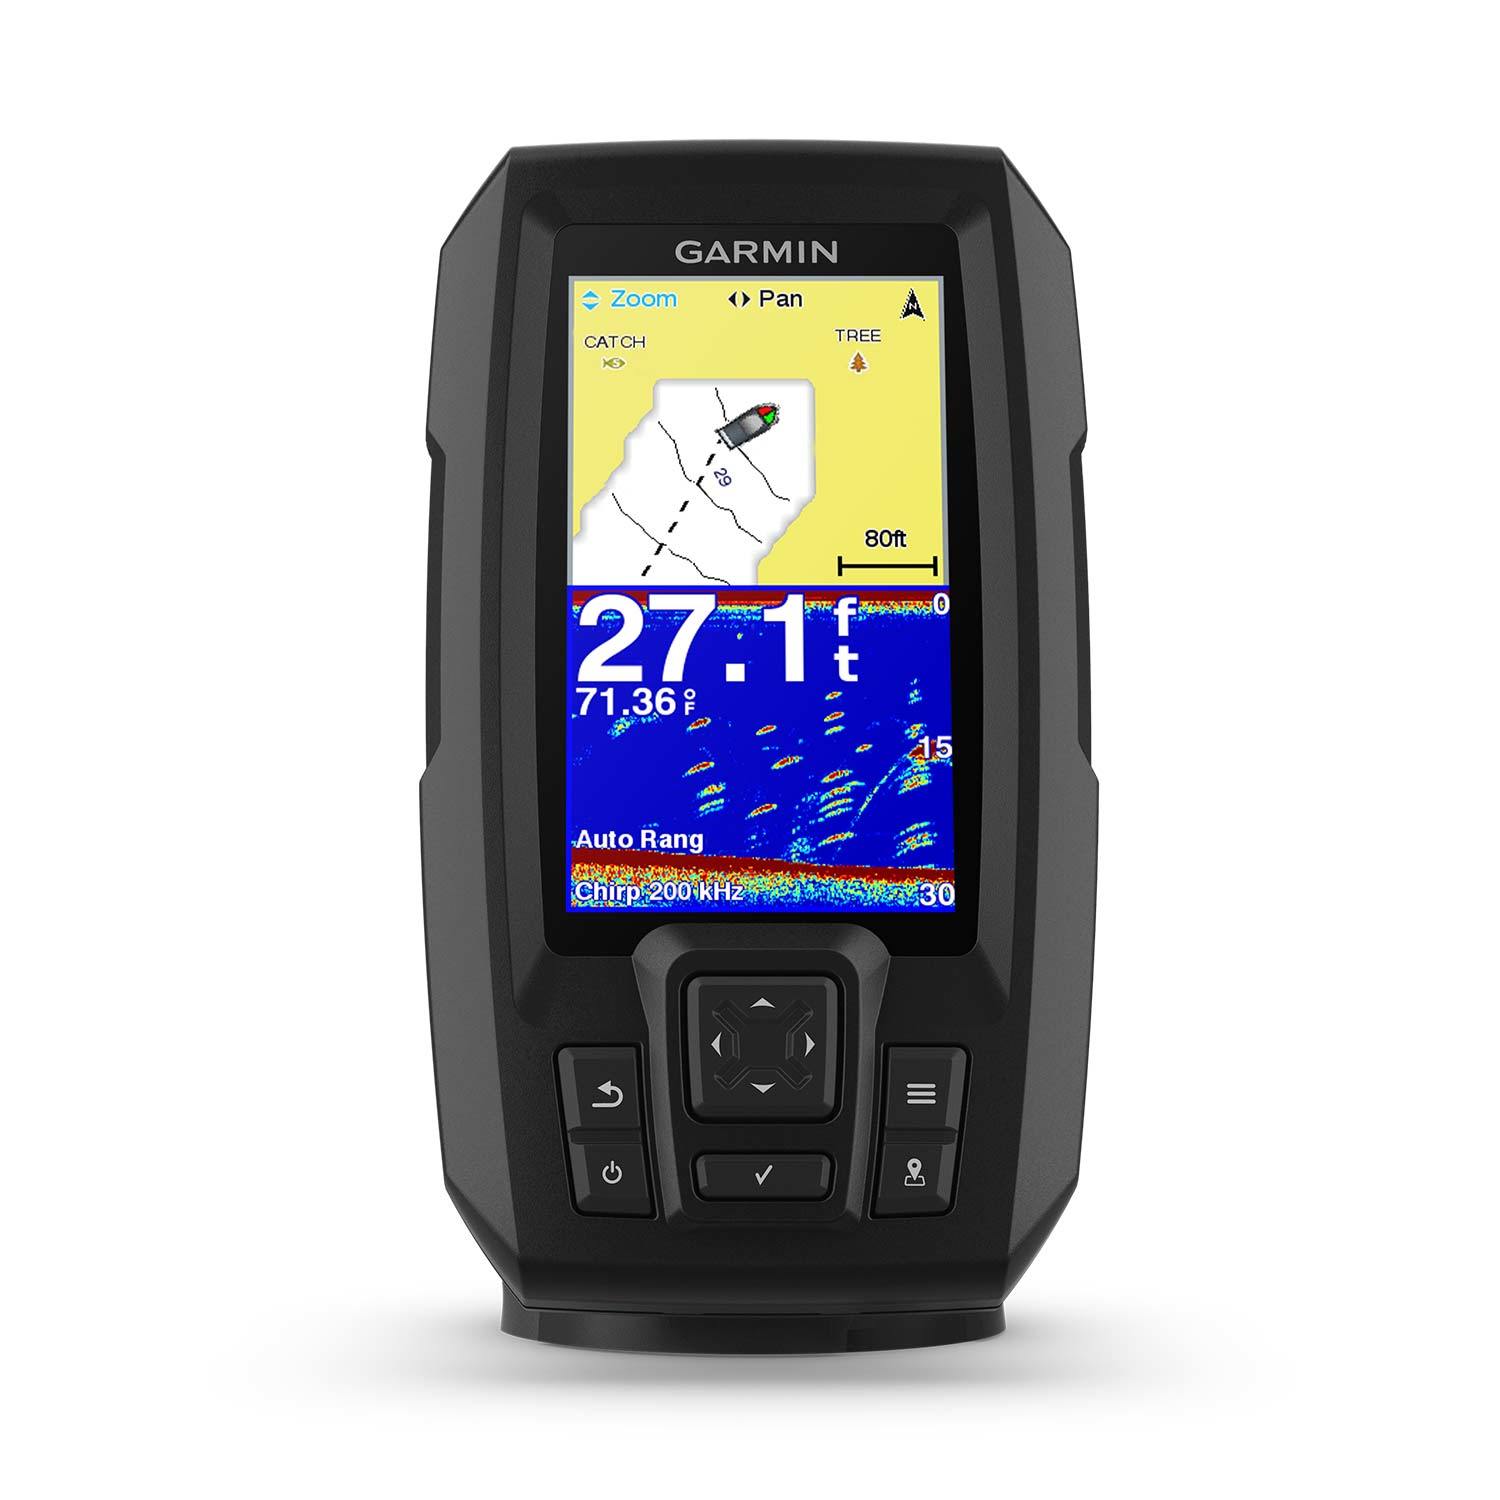 4.3 GPS Fishfinder with Chirp Traditional and ClearVu Scanning Sonar Transducer and Built in Quickdraw Contours Mapping Software Renewed Garmin Striker Plus 4cv 